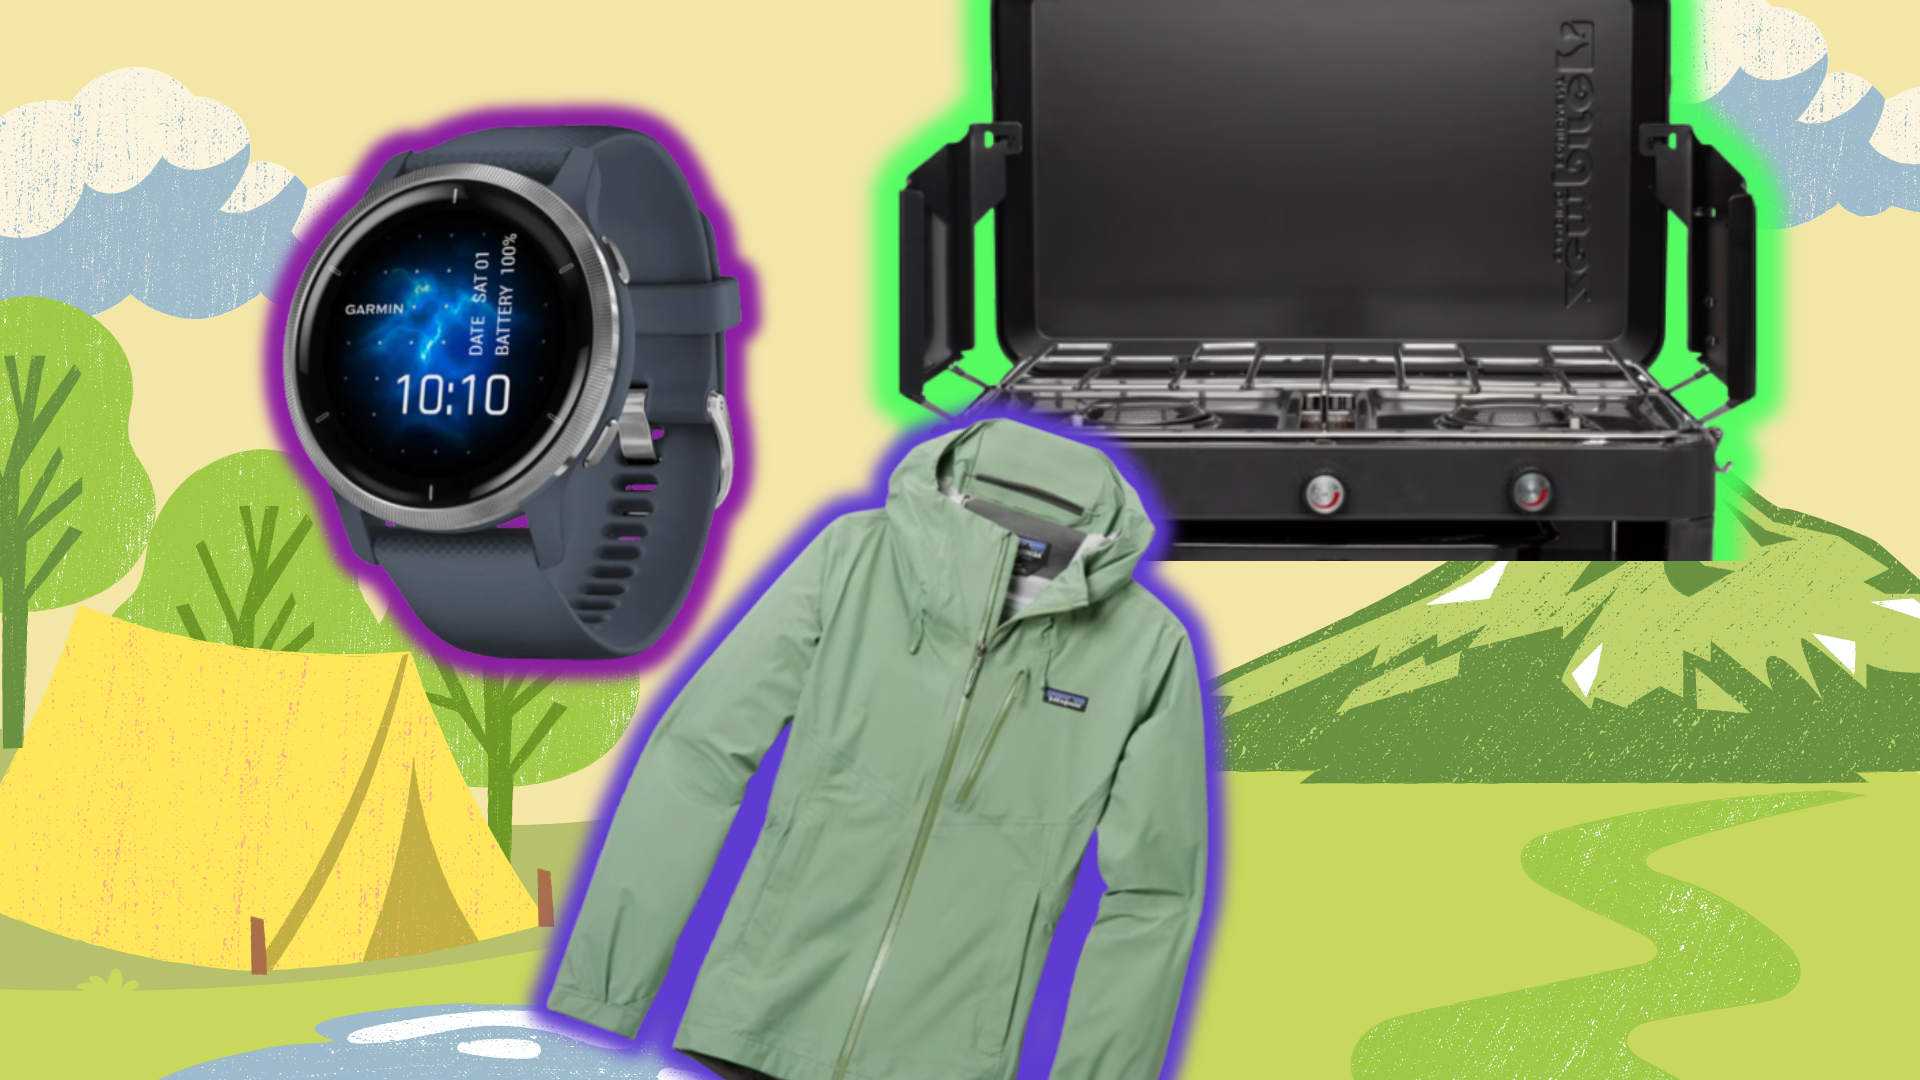 A Garmin watch, Patagonia jacket, and Zempire camping stove overlaid on a background of illustrated outdoor camping with a tent, trees, clouds, and more.